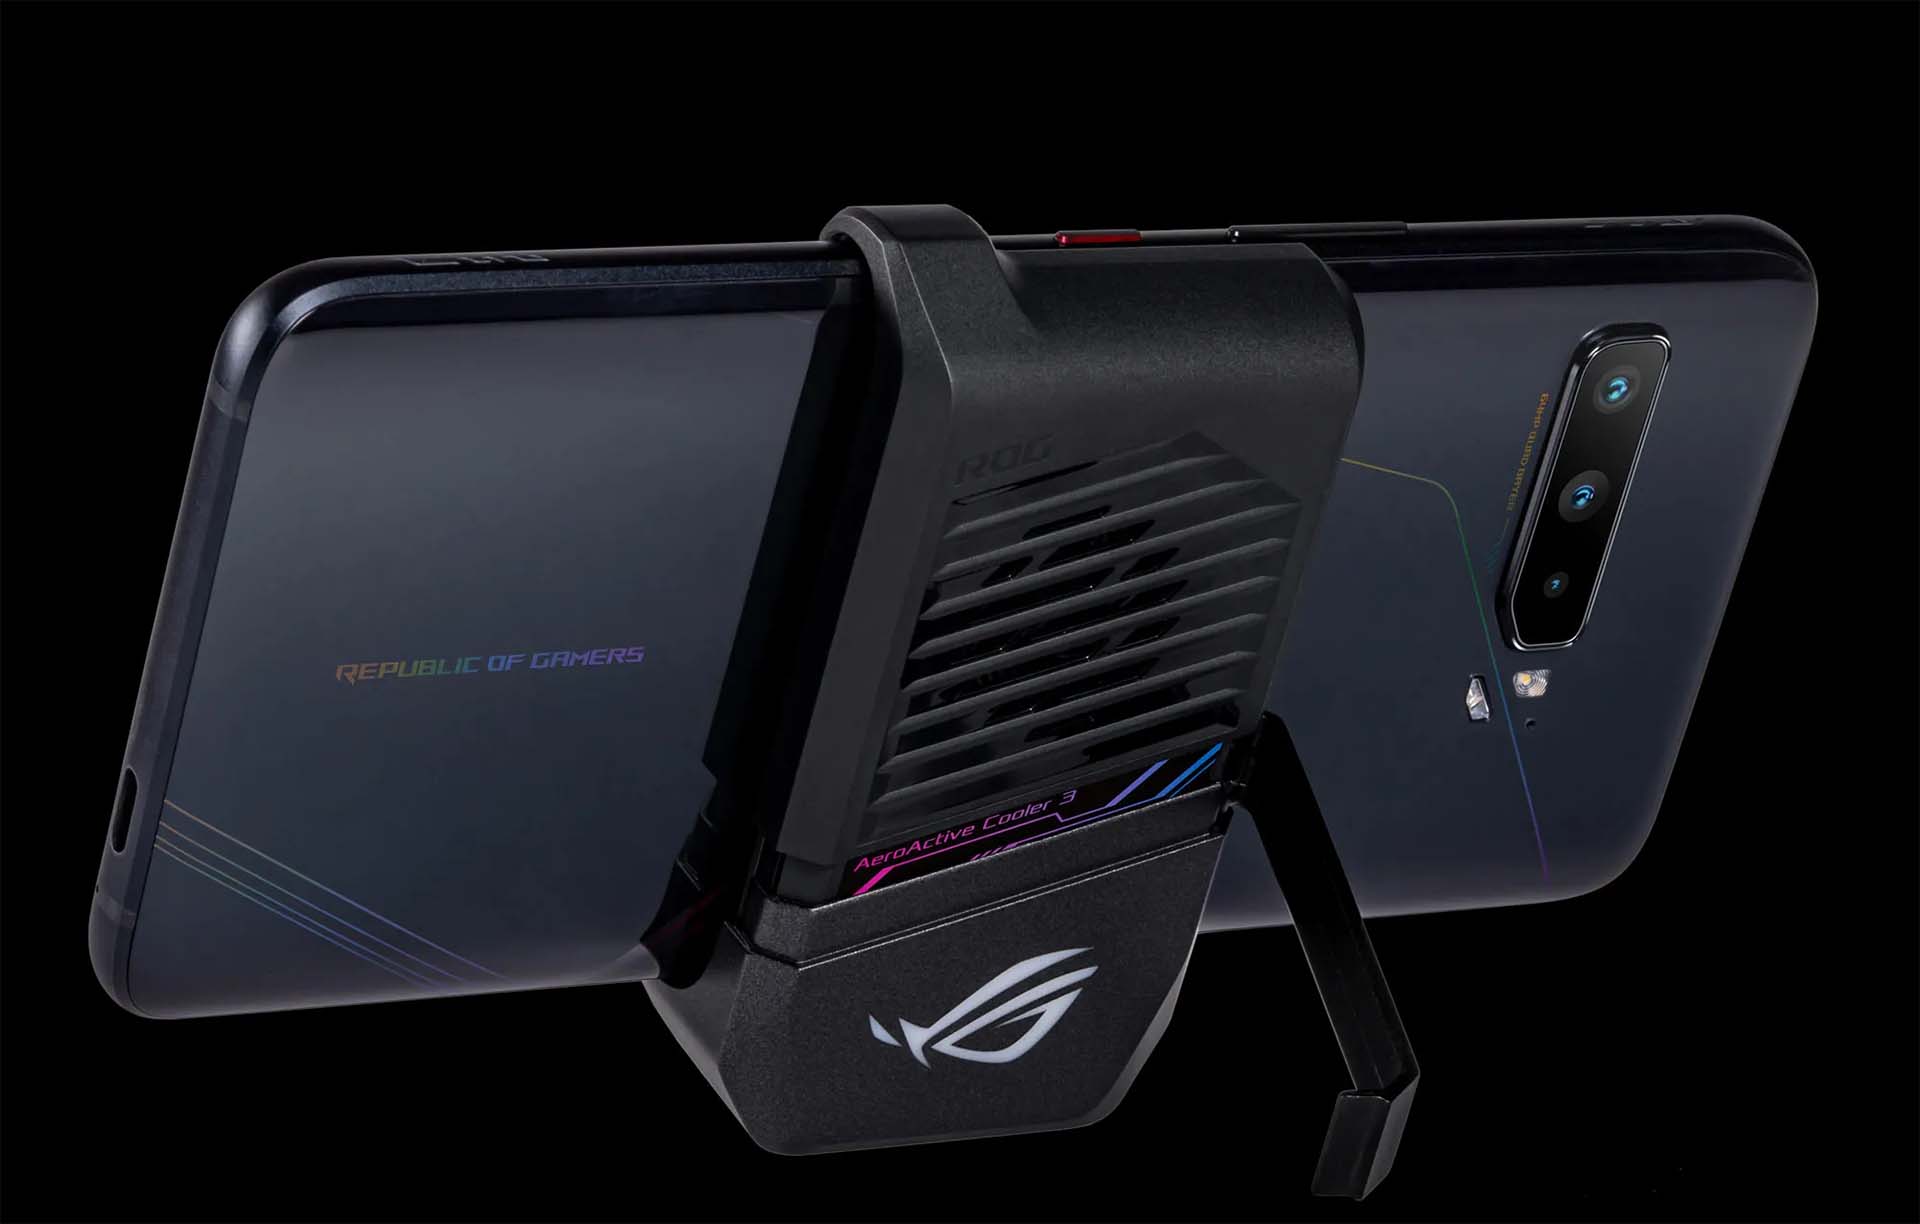 Asus has launched its new gaming phone, Asus ROG Phone 3 in India today. The phones come with the latest Snapdragon 865+ SoC and up to 12GB RAM in India. There is also a 16GB version but that’s not launched in India. Overall the phone packs enough horsepower to play any mobile game you throw at it. Asus ROG Phone 3 Specification Asus ROG Phone 3 features a 6.59-inches full HD+ display that comes with a 144Hz refresh rate, a 270Hz touch sampling rate, and 1,080 x 2,340 pixels resolution. The display has also support for HDR10+ and protected by the 2.5D Corning Gorilla Glass 6. The display also has a TUV Low Blue Light solution as well as a Flicker Reduction-certified technology for eye comfort. The Asus ROG Phone 3 is powered by the latest Qualcomm Snapdragon 865+ SoC coupled with up to 12GB LPDDR5 RAM and up to 256GB of onboard UFS 3.1 storage that doesn't support expansion through a microSD card. The ROG Phone 3 has a 6x large heat sink and comes with GameCool 3 cooling system. It also comes with an 'X Mode' for gaming that will also allow game profile customizations. At the back, Asus ROG Phone 3 has a triple rear camera setup consists of a 64 MP f/1.7 Sony IMX686 primary camera, 13 MP ultra-wide camera with 125-degree FOV, a 5 MP f/2.0 macro lens. At the front, it has a 24MP f/2.0 camera for selfies. Asus ROG Phone 3 also comes with a Pro Video mode that allows 8K and 4K HDR 60fps recording, HyperSteady video-recording stabilization while the front camera support 1080P recording. Asus ROG Phone 3 has a 6,000 mAh battery that comes with a 30 W fast charging support. The ROG Phone 3 sports dual, front-facing speakers powered by ROG GameFX and Dirac HD Sound technologies. There is also Hi-Res audio support. Additionally, the device has quad microphones with Asus Noise Reduction technology. The smartphone also features AirTrigger 3 tech that will allow users to customize different motion sensors as per the game they are playing and their own comfort. On the connectivity side, the Asus ROG Phone 3 supports 5G, 4G LTE, Wi-Fi 6, Bluetooth v5.1, GPS/ A-GPS/ NavIC. The device has an accelerometer, ambient light, gyroscope, magnetometer, and a proximity sensor. It also has an in-display fingerprint sensor. Pricing and Availability ROG Phone 3 will be available in two configurations in India– 8GB+128GB and 12GB+256GB. The Asus ROG Phone 3 price in India has been set at Rs. 49,999 (~0) for the8GB RAM + 128GB storage one while the 12GB RAM + 256GB storage will cost you Rs. 57,999 (~7). This smartphone will be available to buy in a single color variant and go on sale starting from 6th August, exclusively on Flipkart.